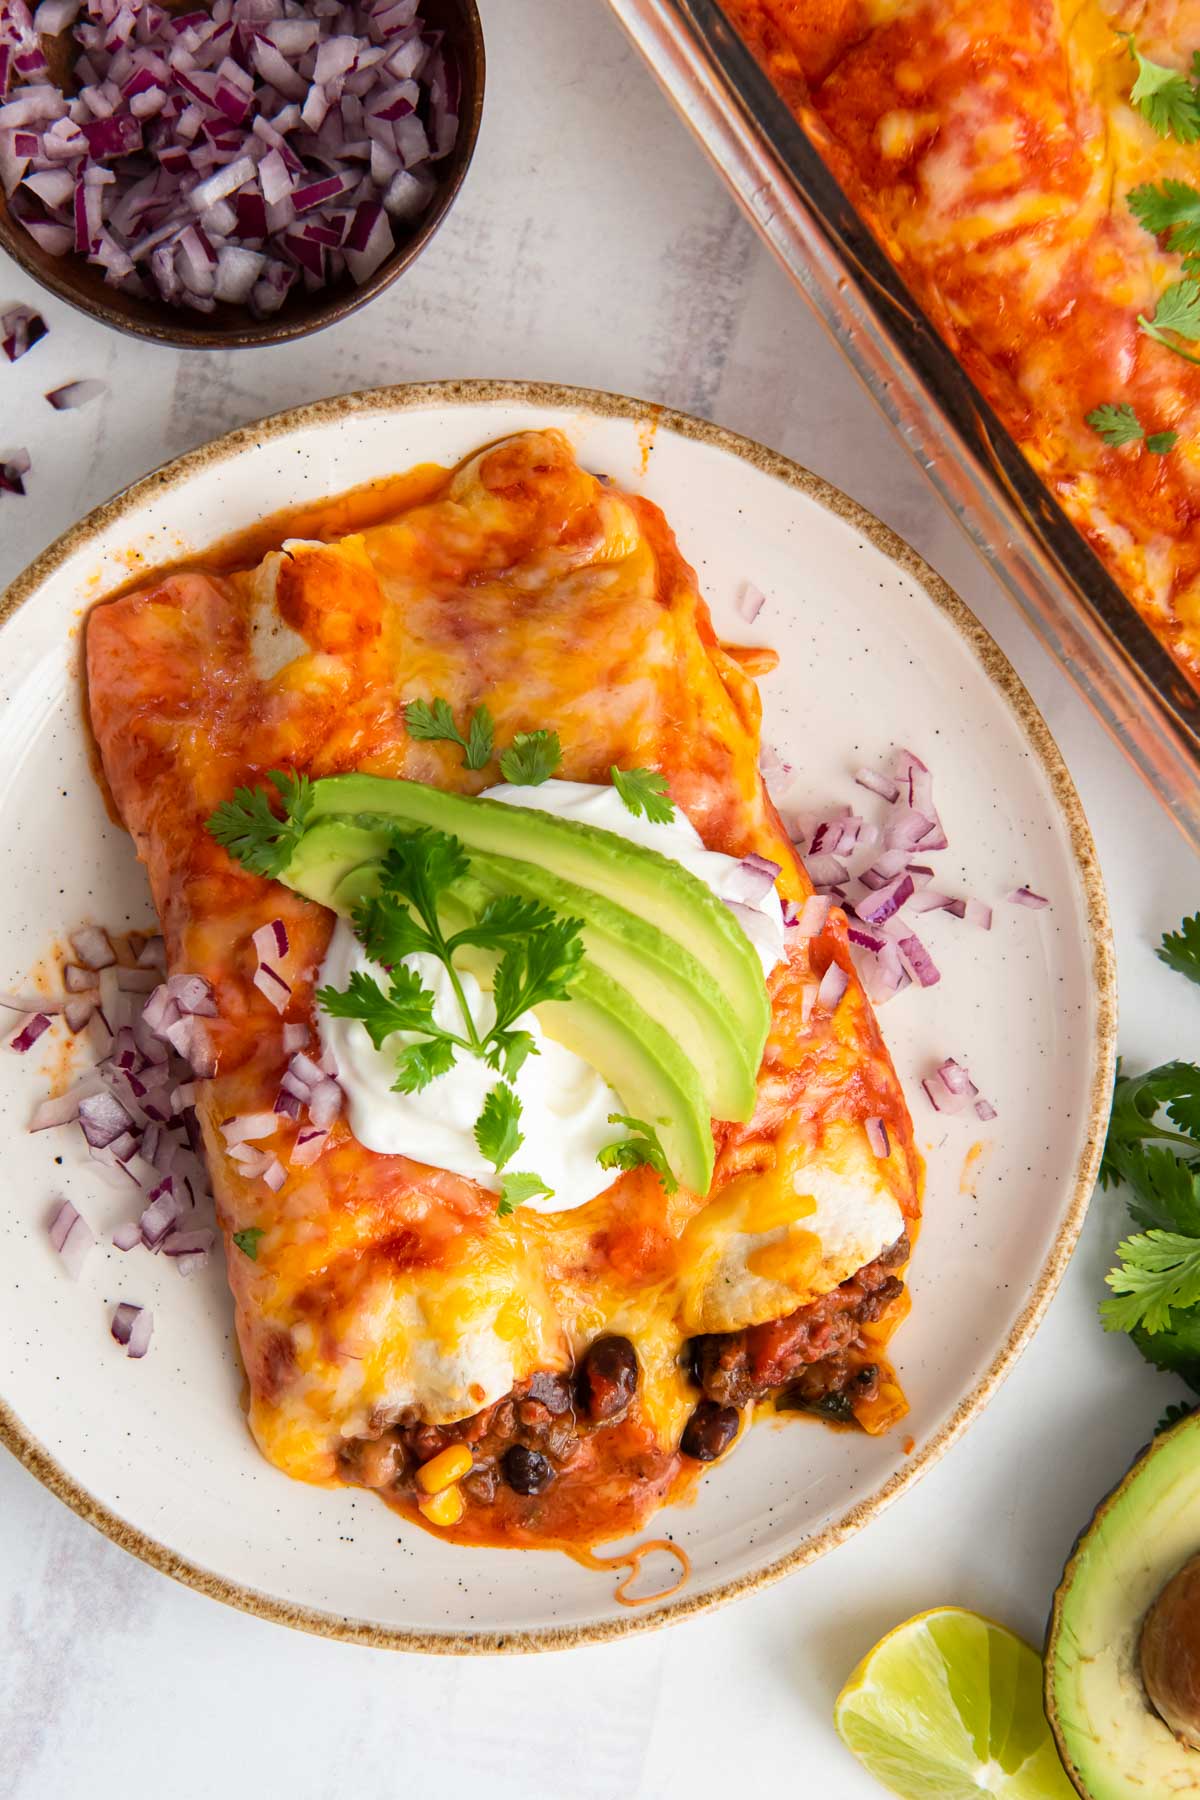 Two enchiladas on a plate, topped with sour cream, avocado, cilantro and red onion.